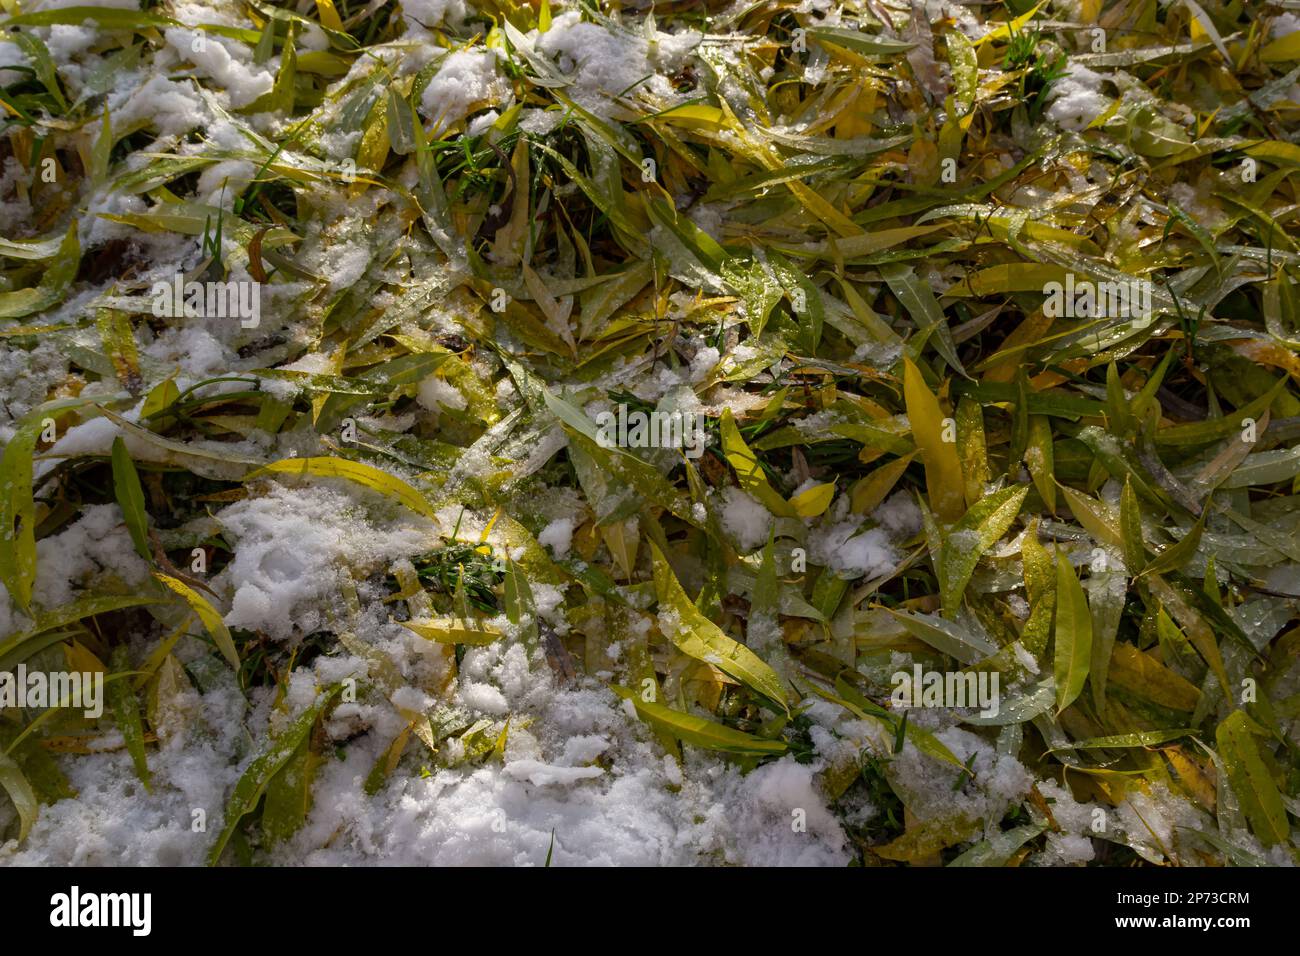 Snow-covered withered leaves on the ground in early winter. Stock Photo